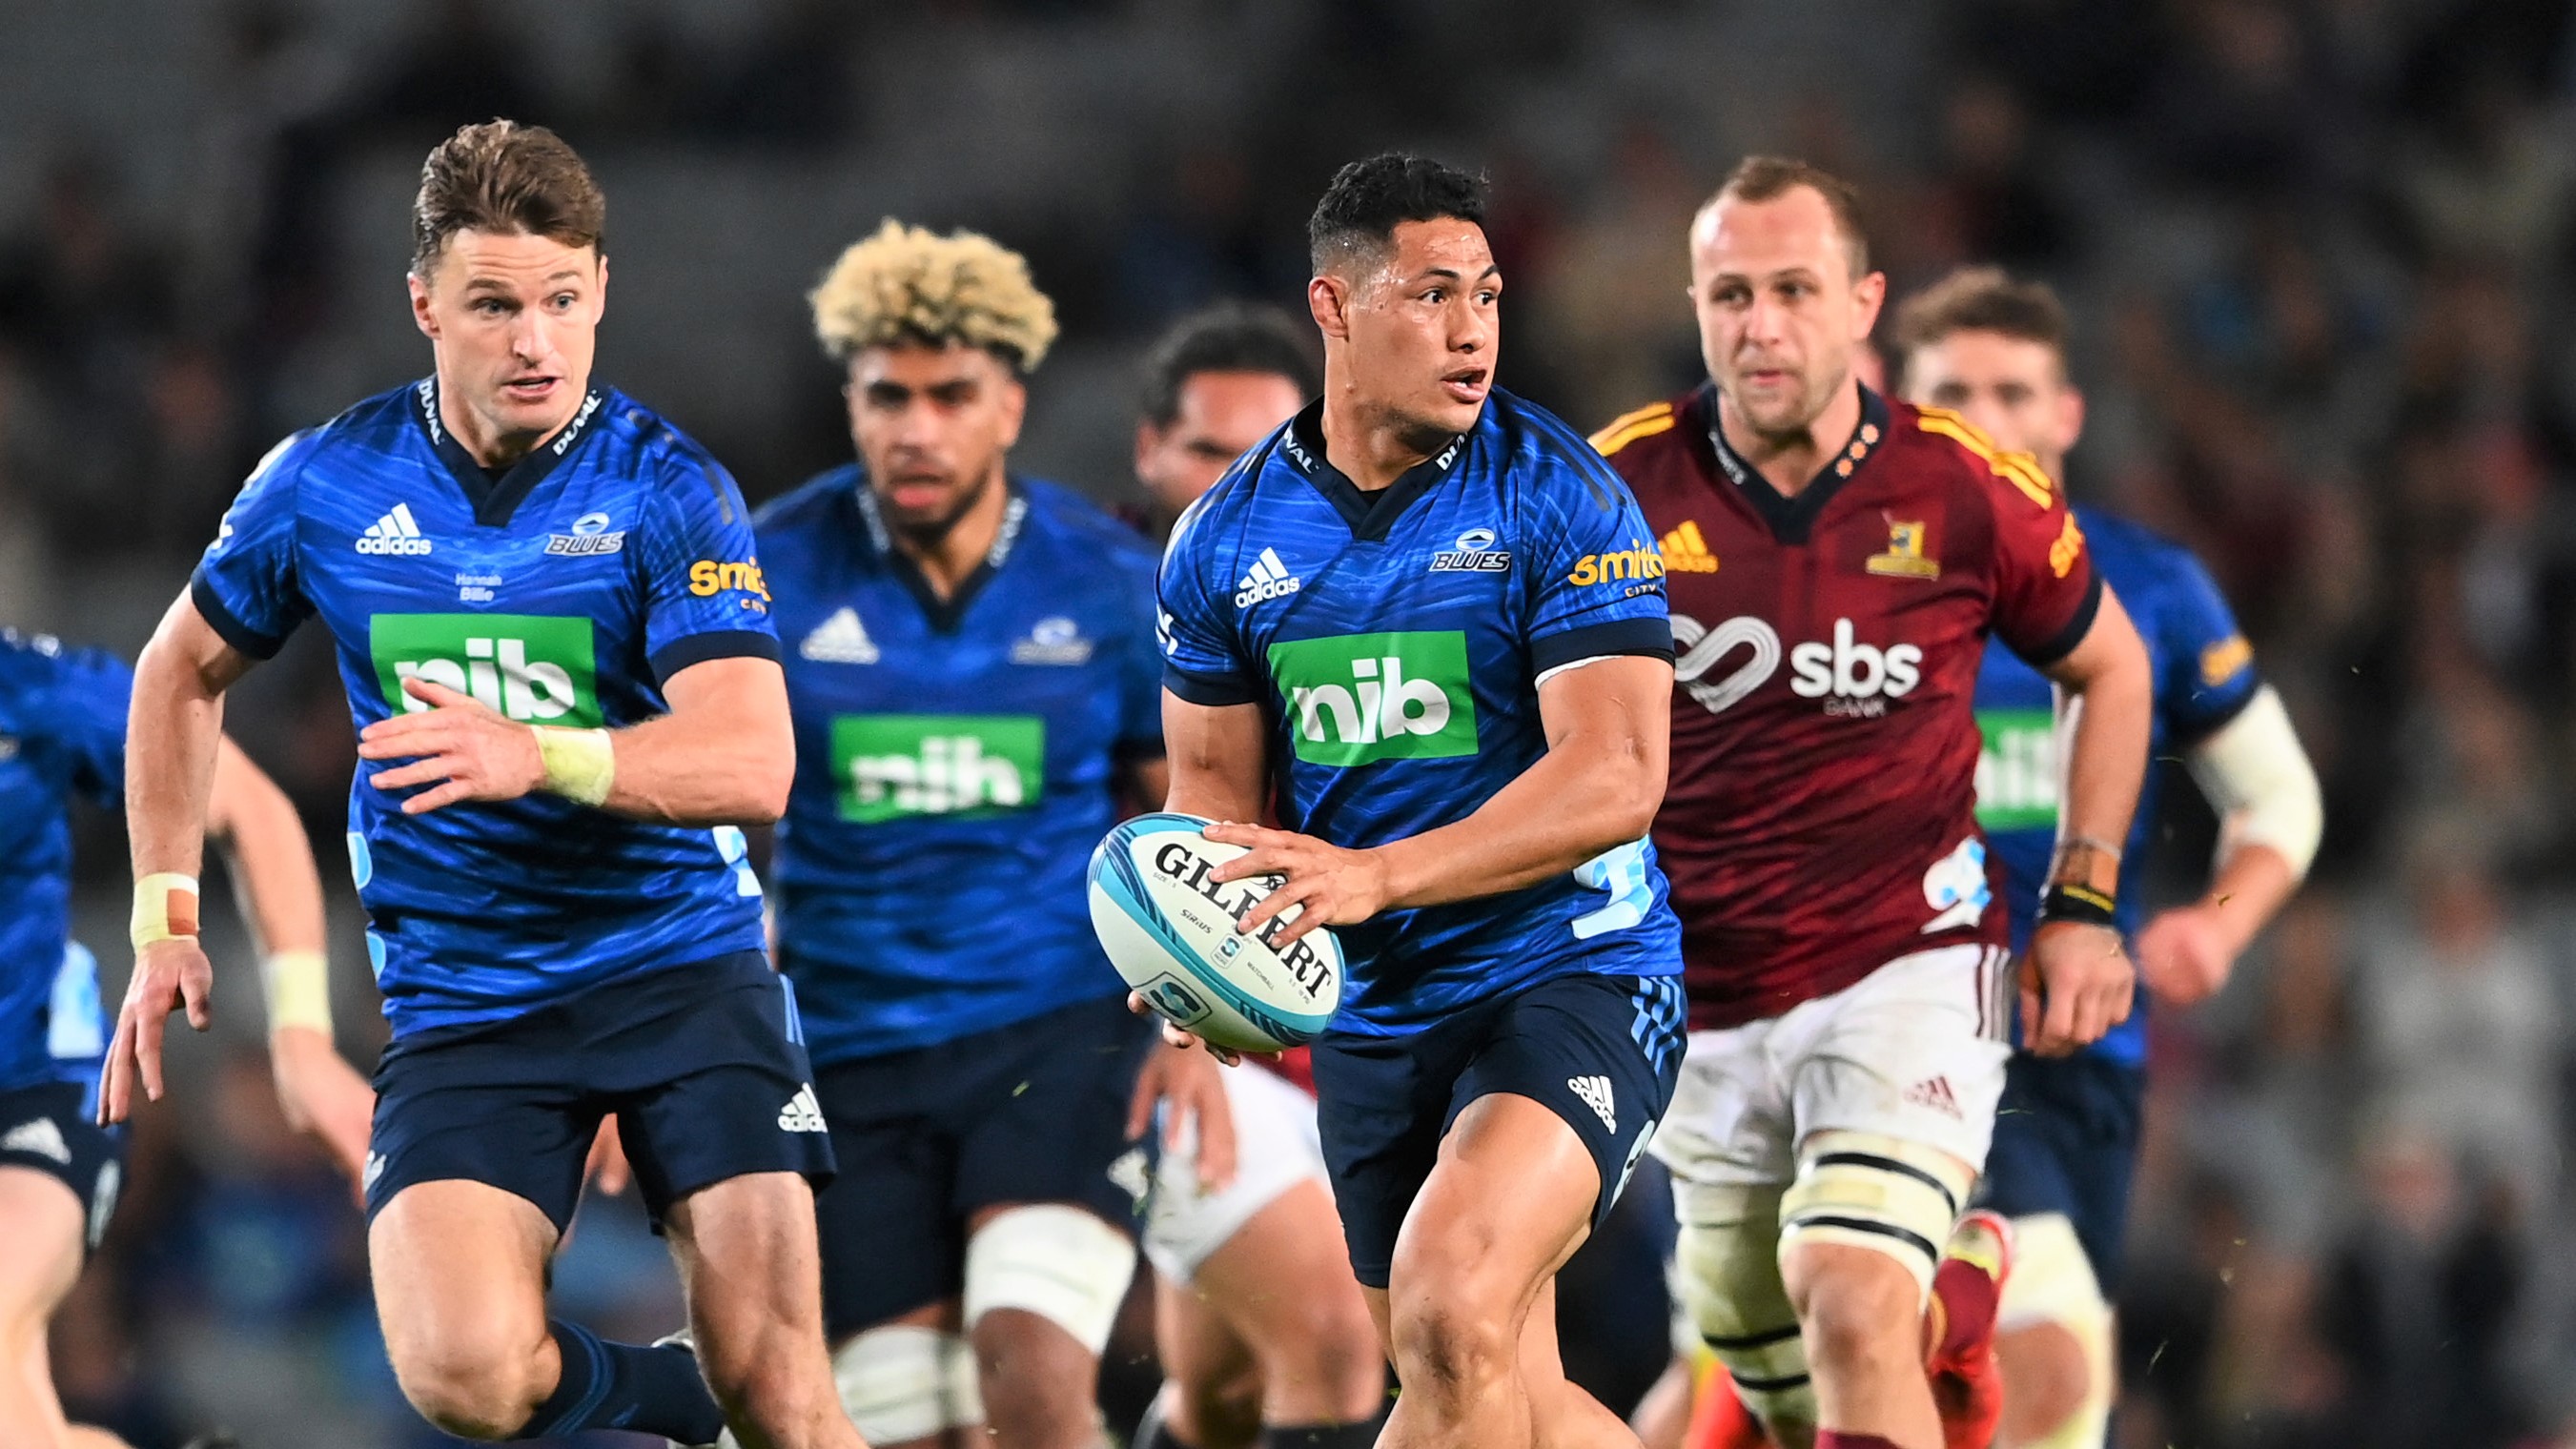 AUCKLAND, NEW ZEALAND - JUNE 04: Roger Tuivasa-Sheck of the Blues makes a break during the Super Rugby Pacific Quarter Final match between the Blues and the Highlanders at Eden Park on June 04, 2022 in Auckland, New Zealand. (Photo by Hannah Peters/Getty Images)